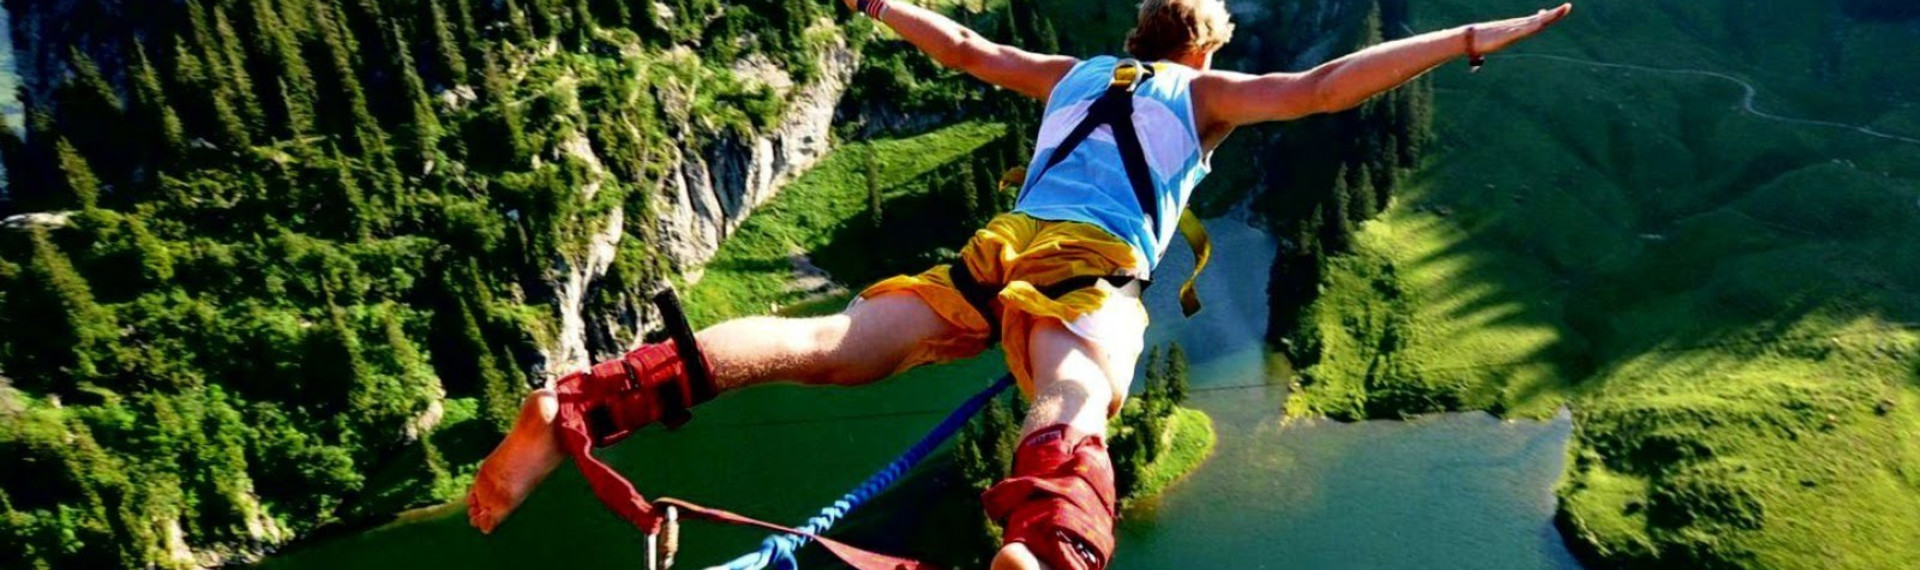 Bungee Jumping Riga | Pissup Tours